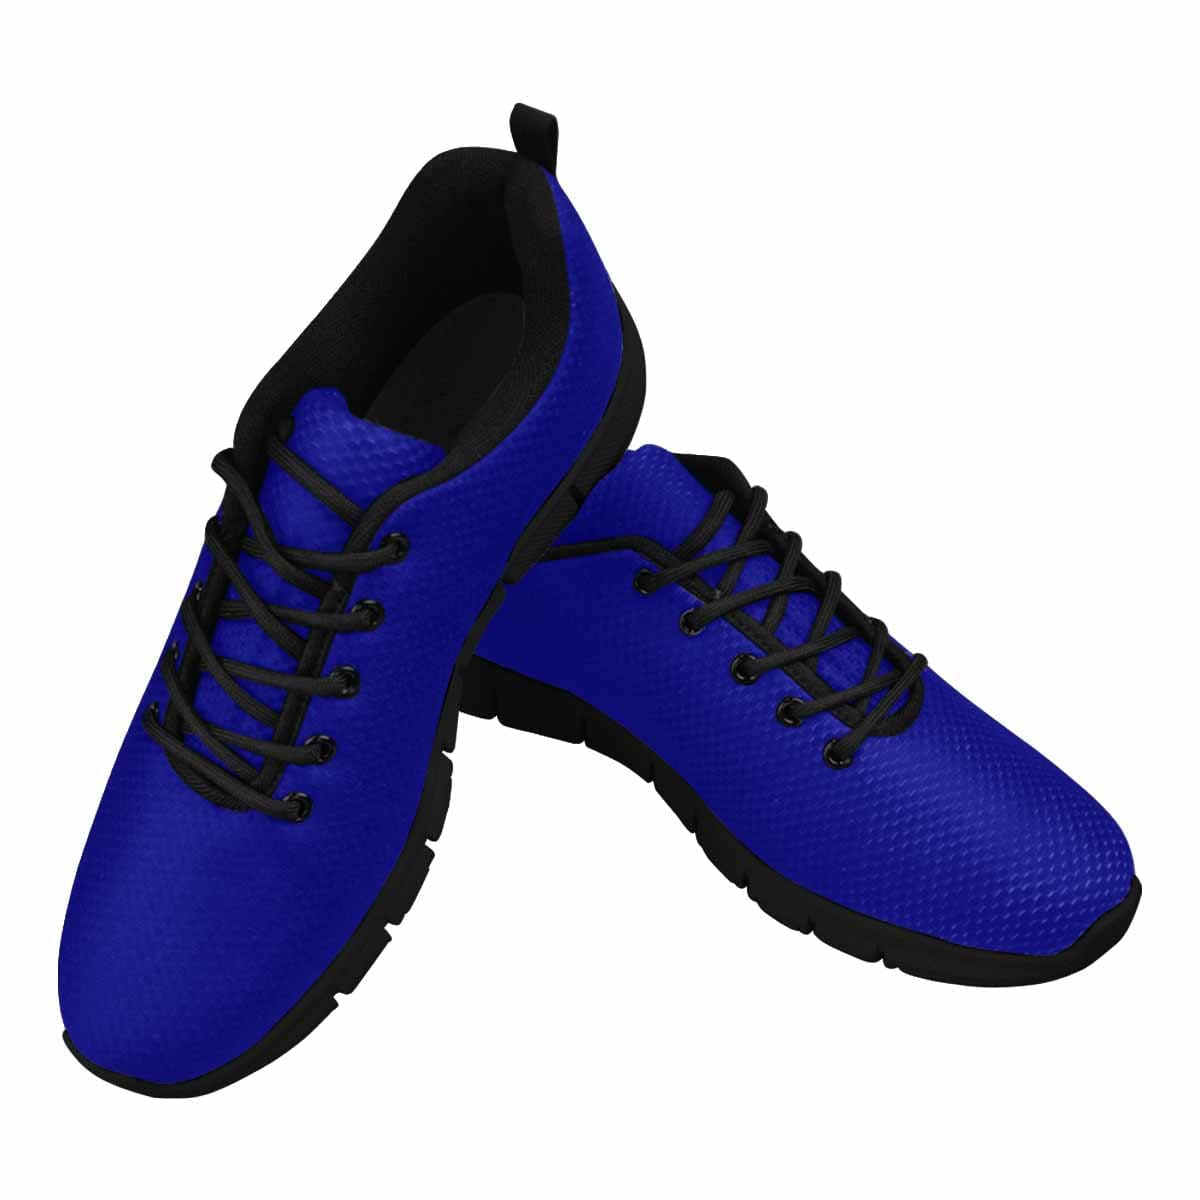 Sneakers For Men Dark Blue - Canvas Mesh Athletic Running Shoes - Mens